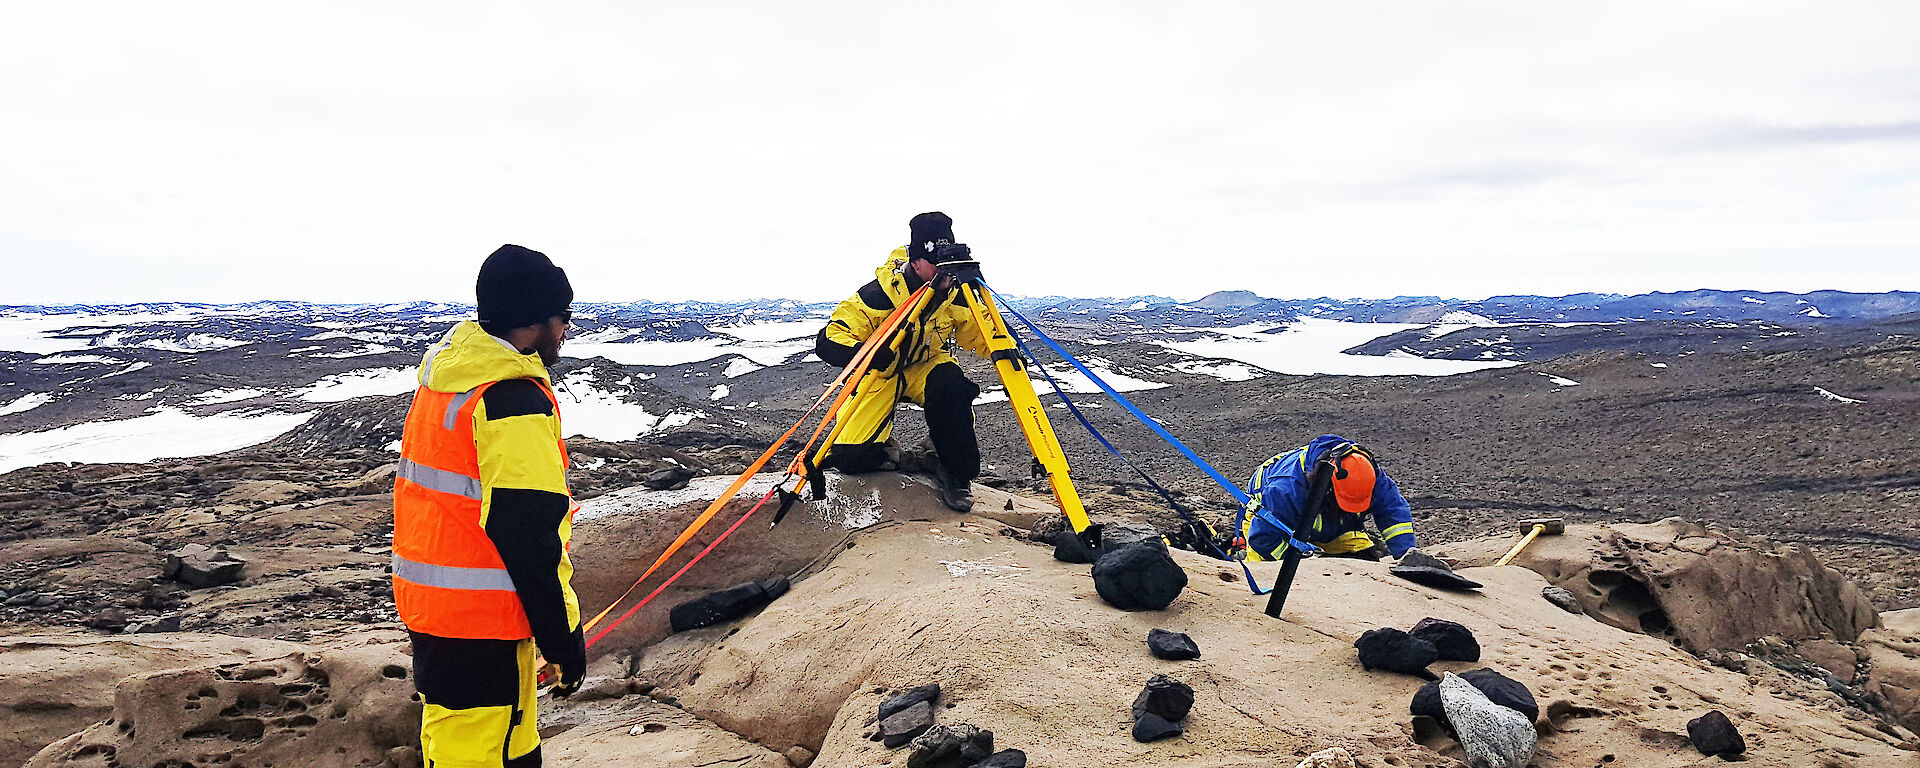 Two expeditioners using surveying equipment